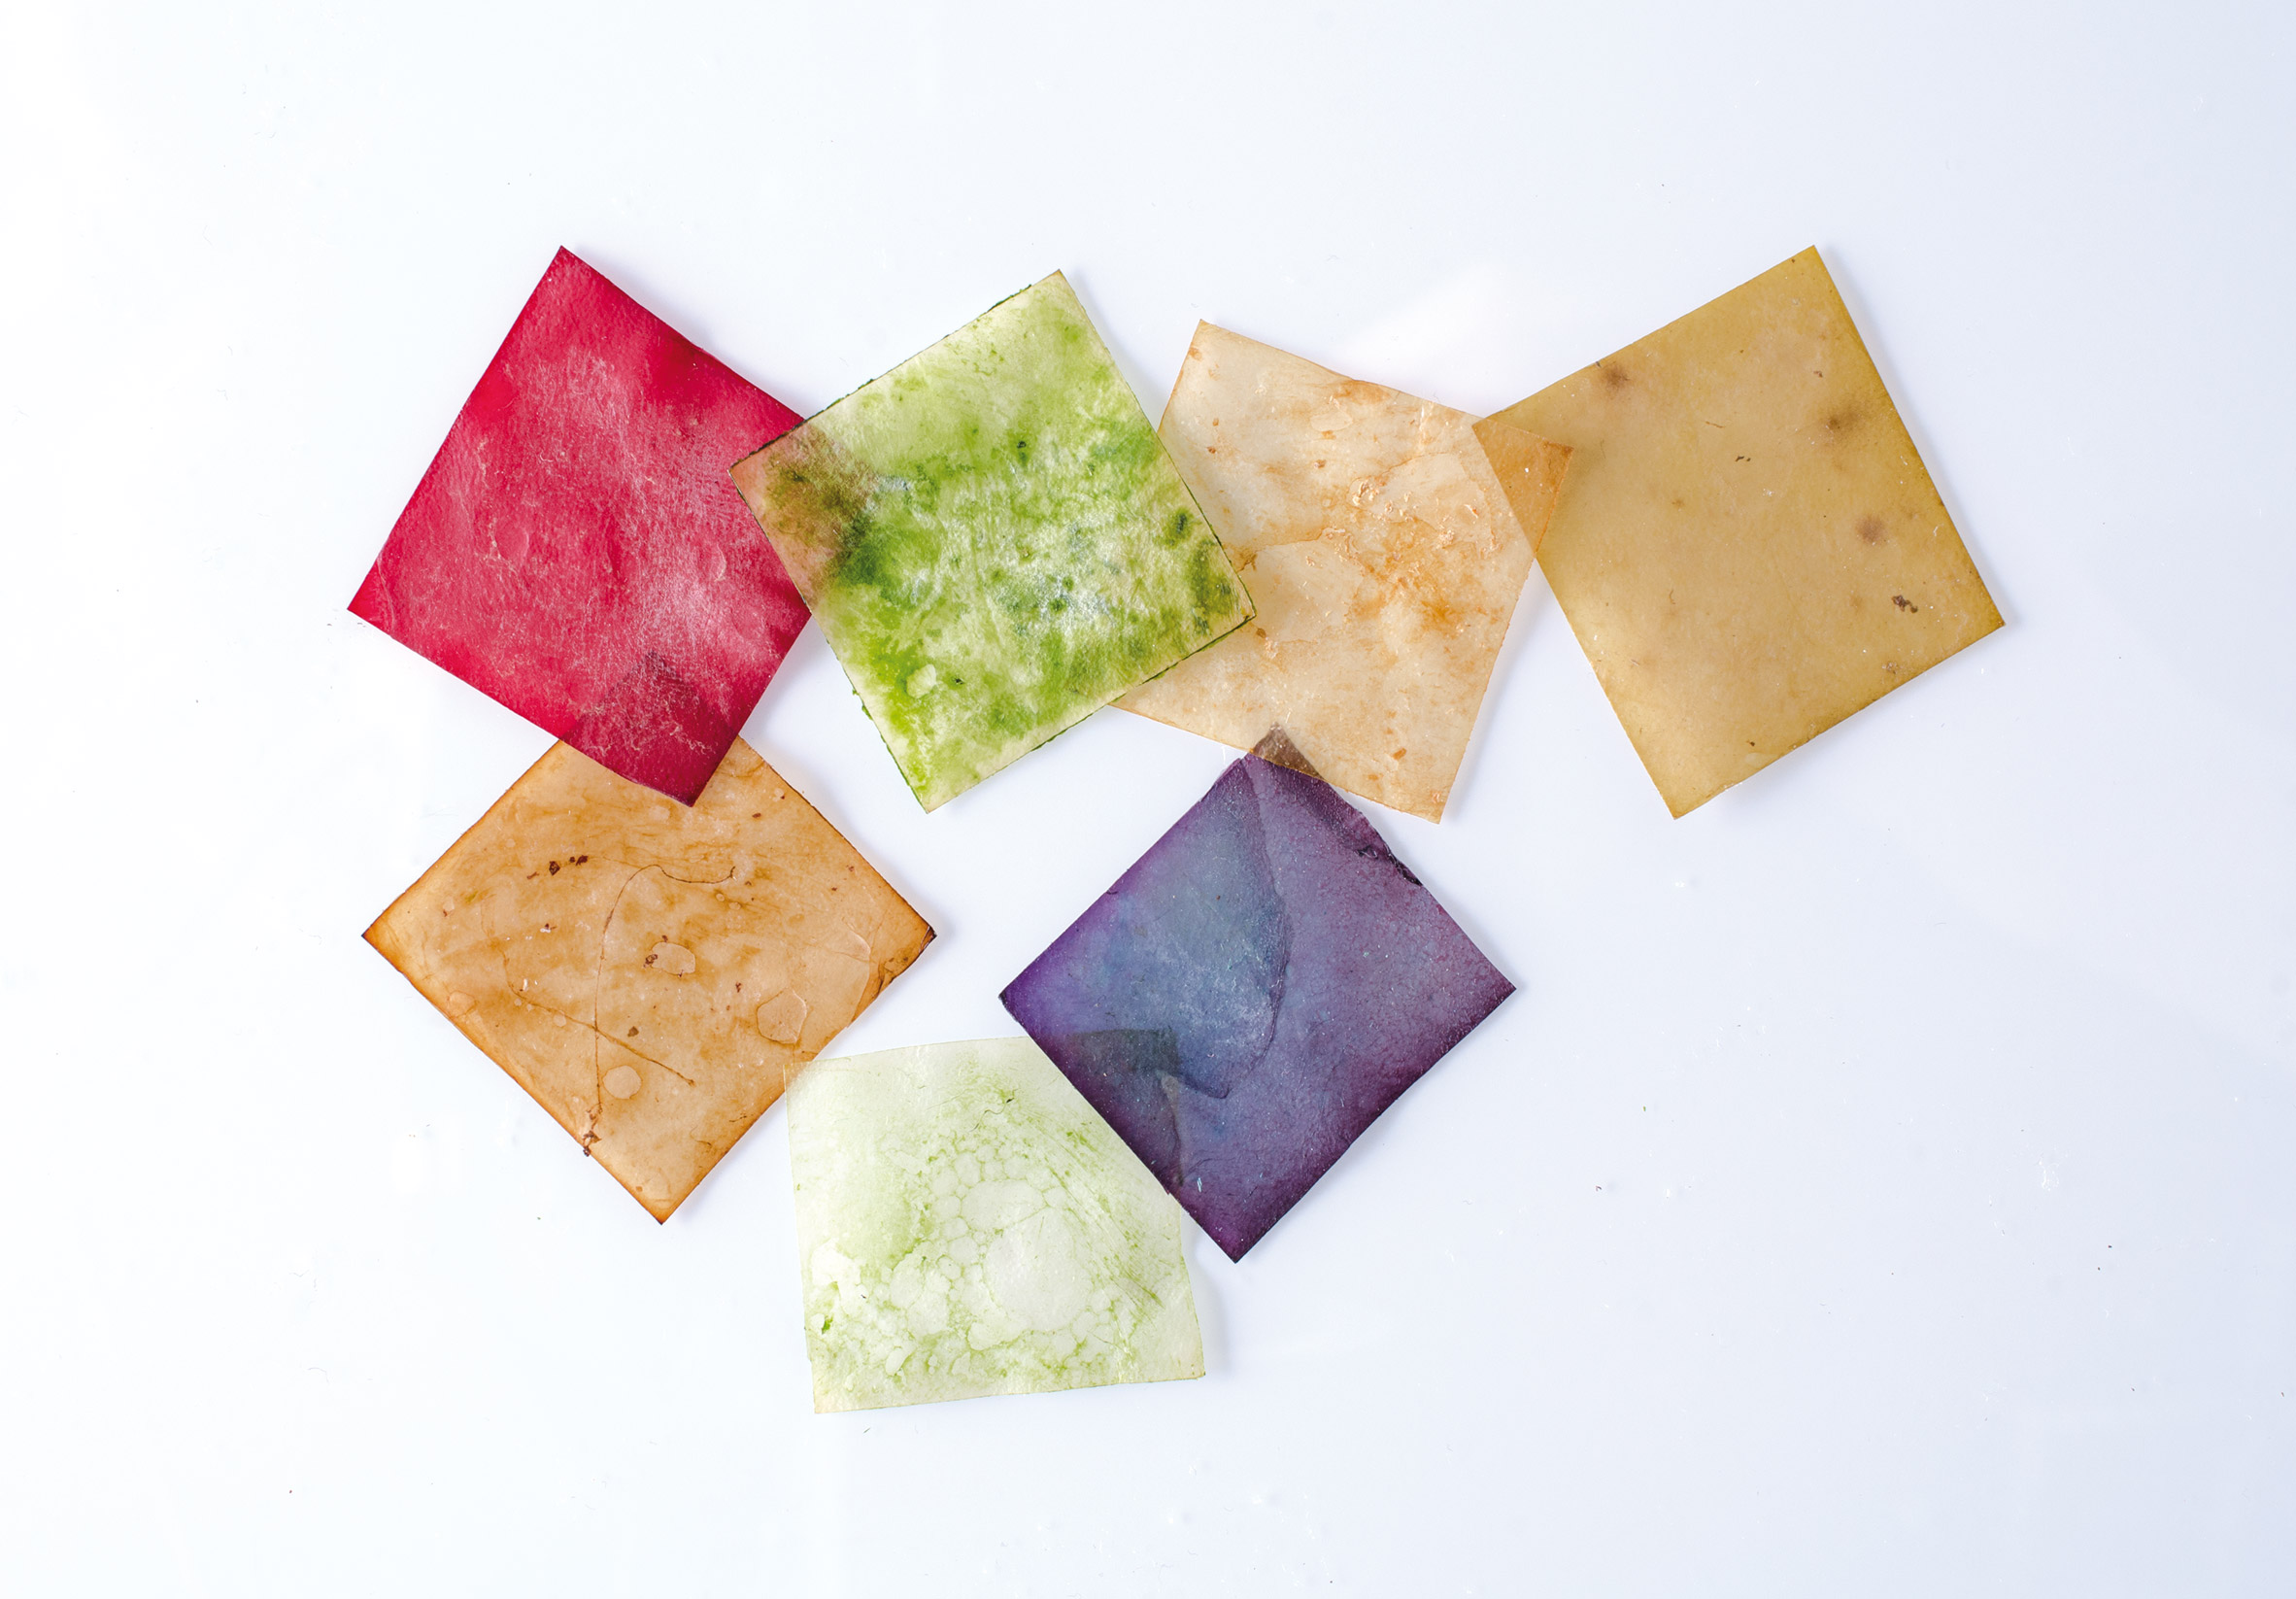 Emma Sicher makes sustainable food packaging from fermented